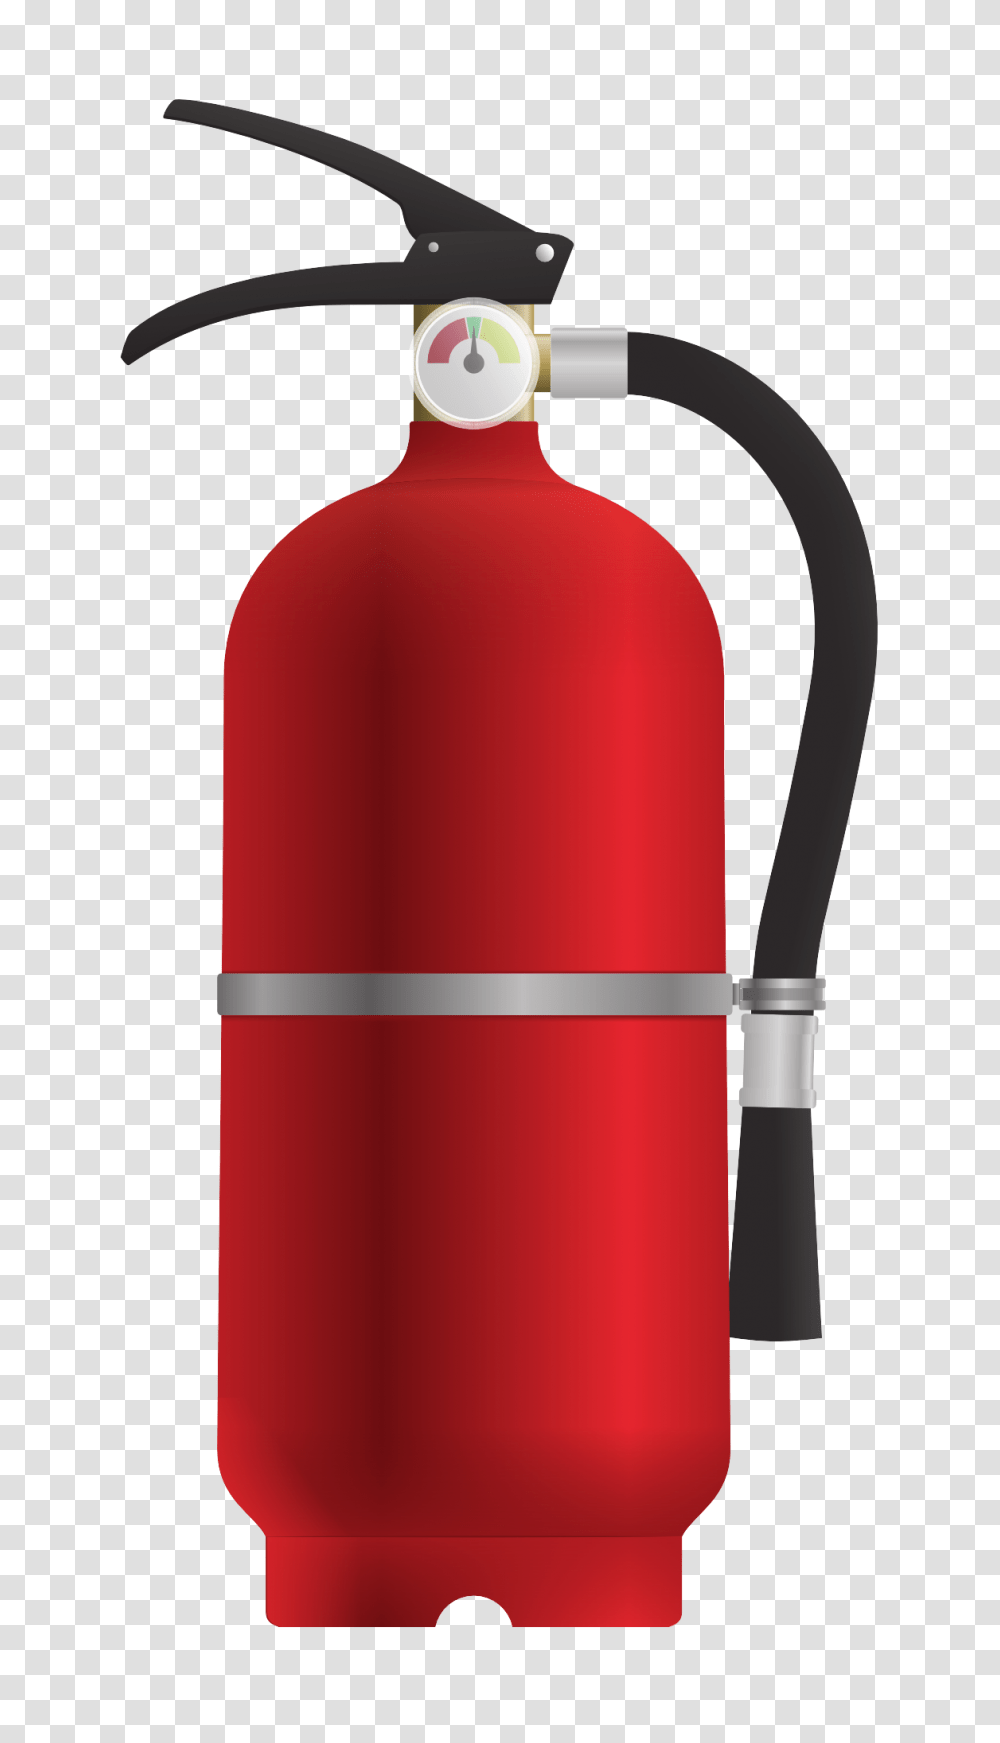 Fire Extinguisher Vector Image, Dynamite, Bomb, Weapon, Weaponry Transparent Png